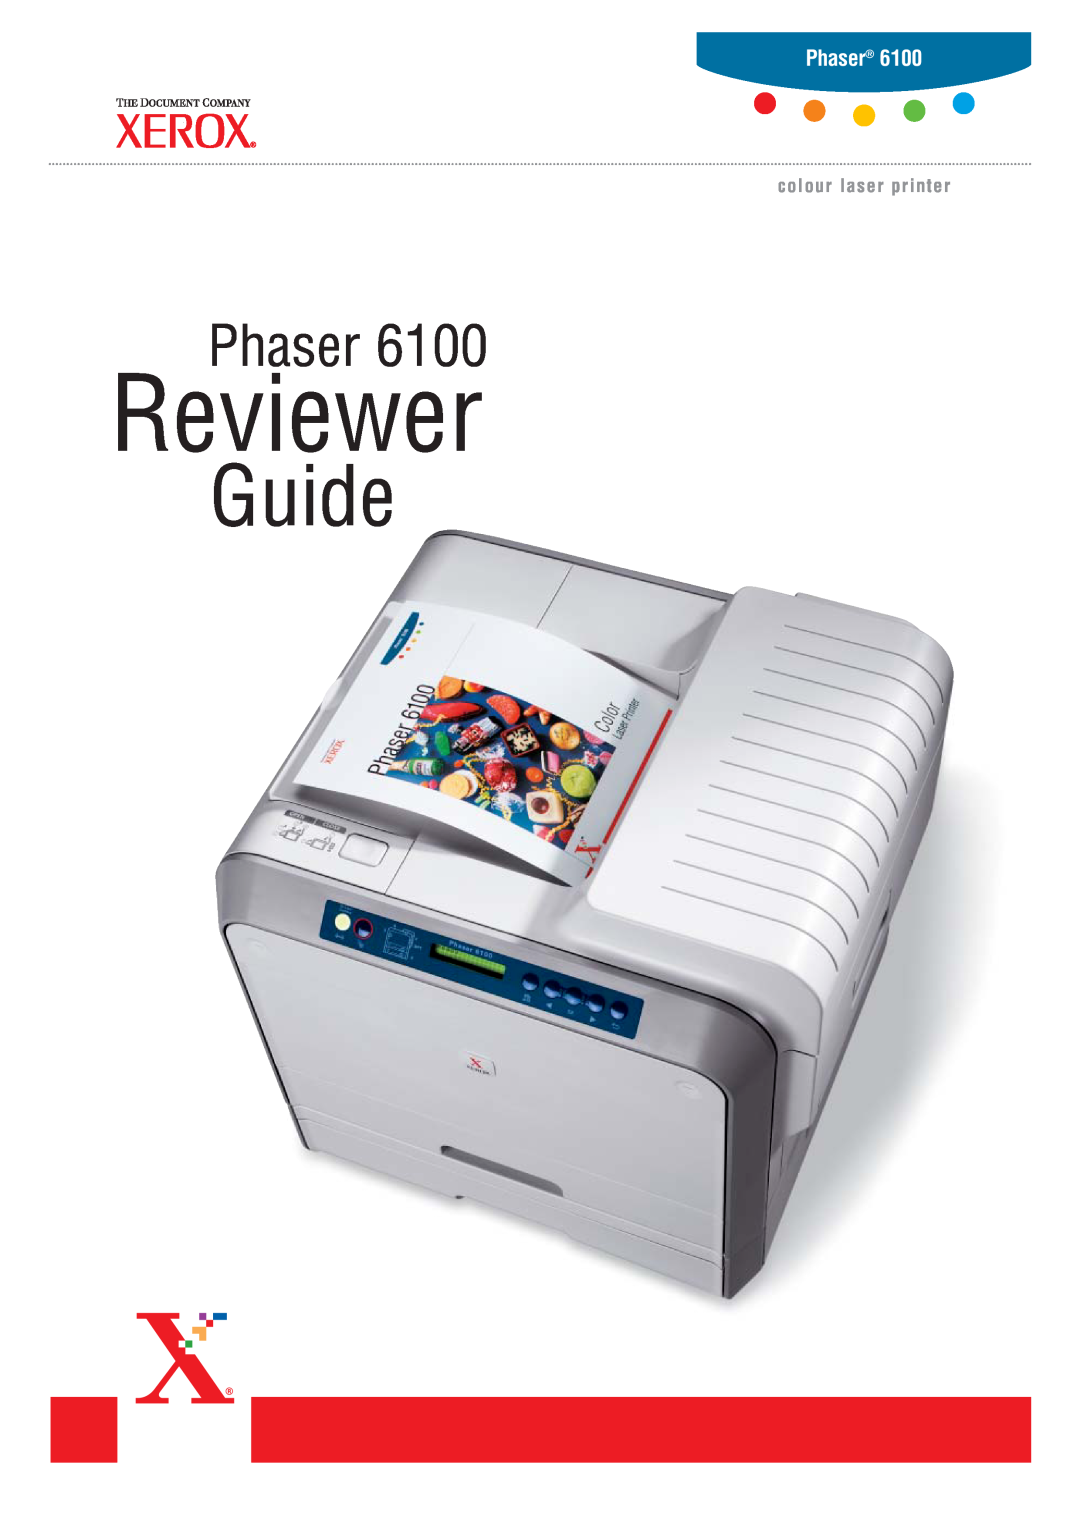 Xerox 6100 manual Phaser, Reviewer, Guide, colour laser printer 